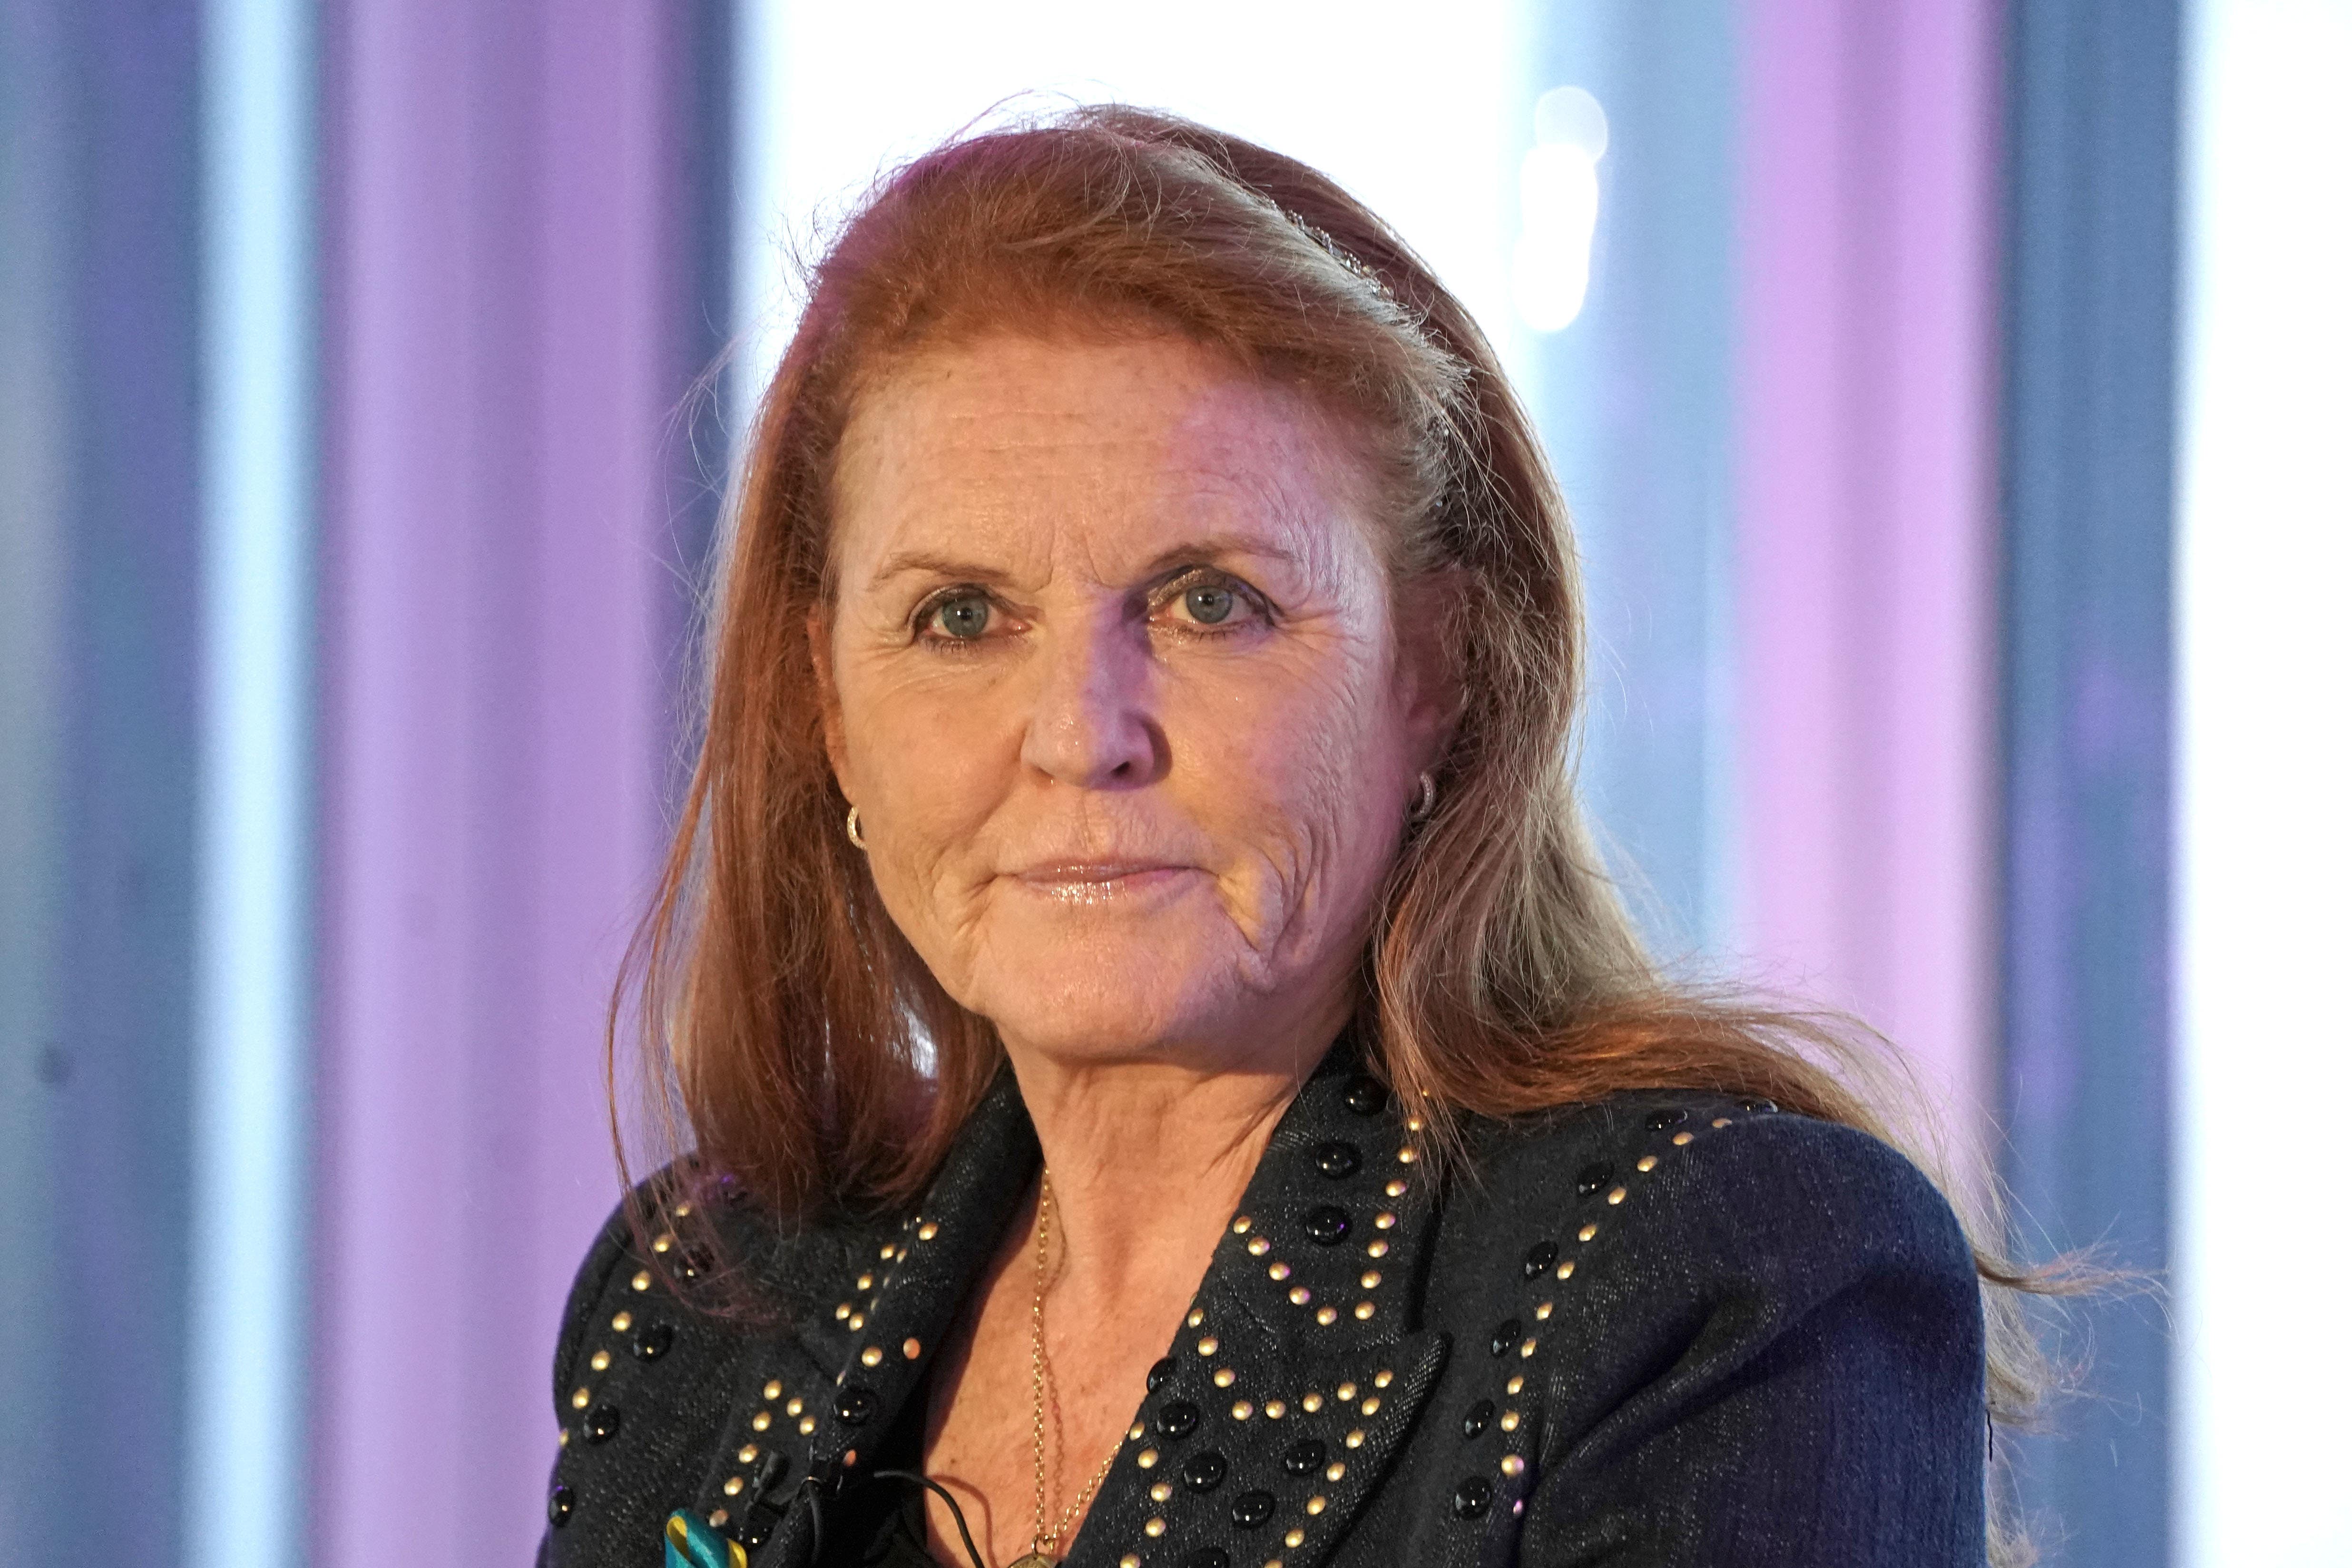 Duchess of York has single mastectomy and vows to get 'super fit